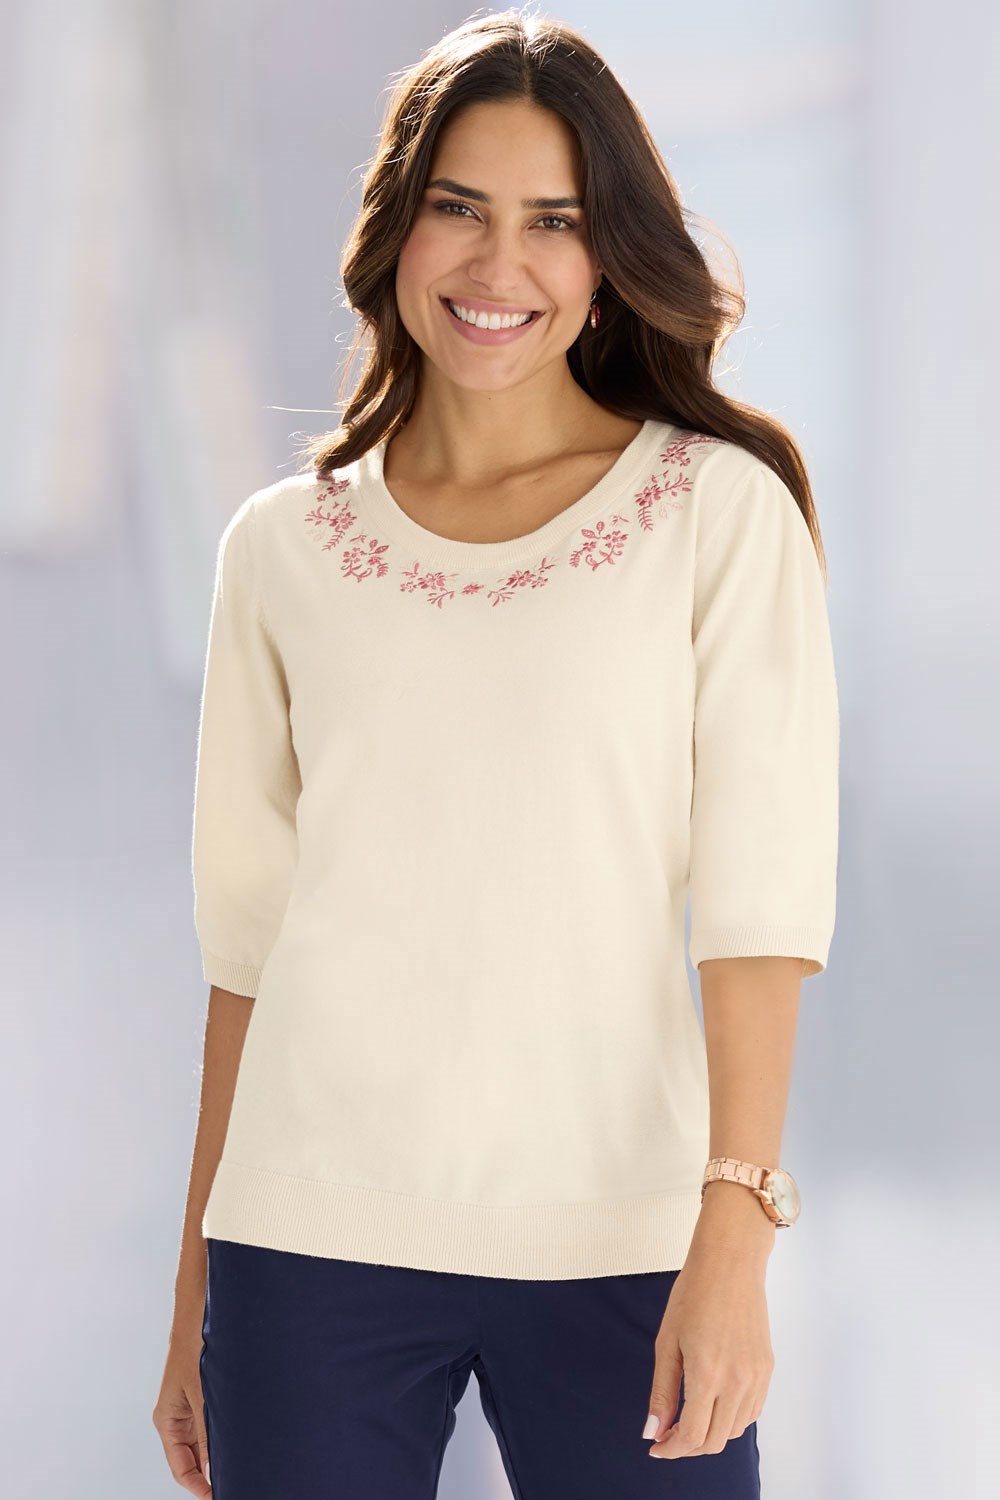 Women’s Cotton Embroidered Jumper